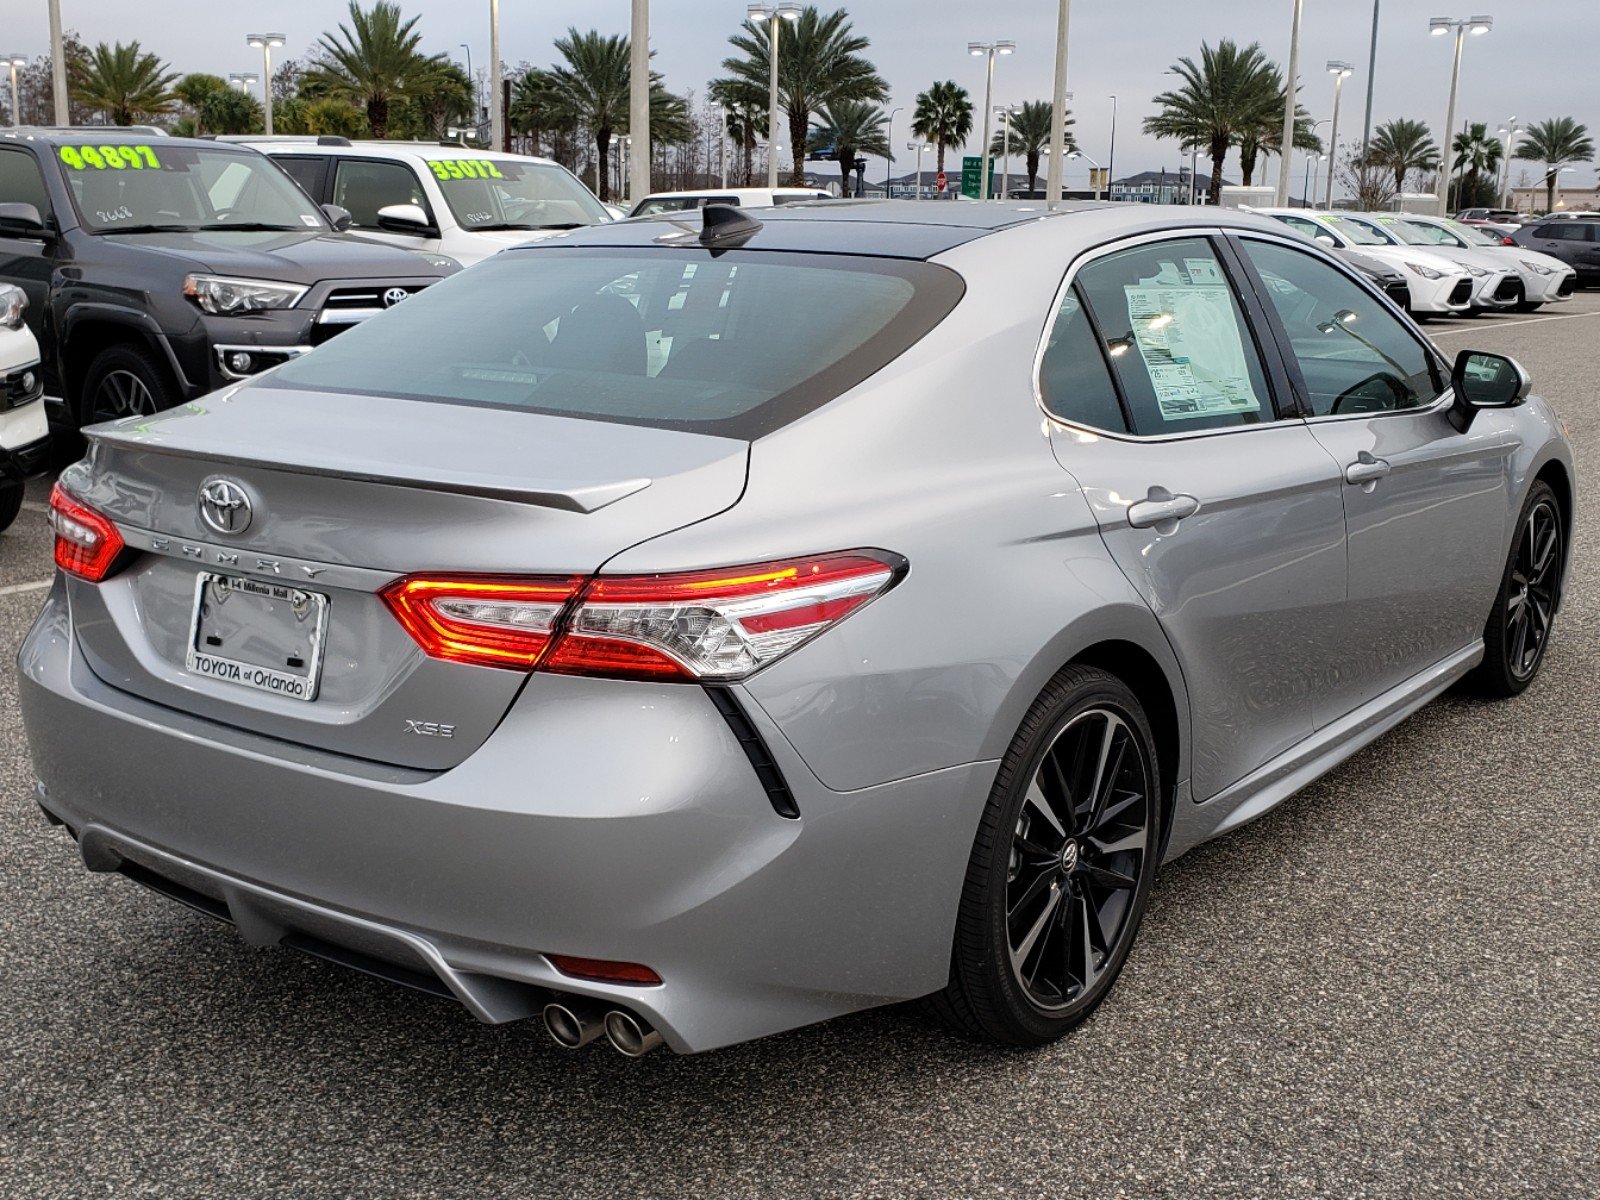 New 2020 Toyota Camry XSE V6 4dr Car in Orlando #0250309 | Toyota of